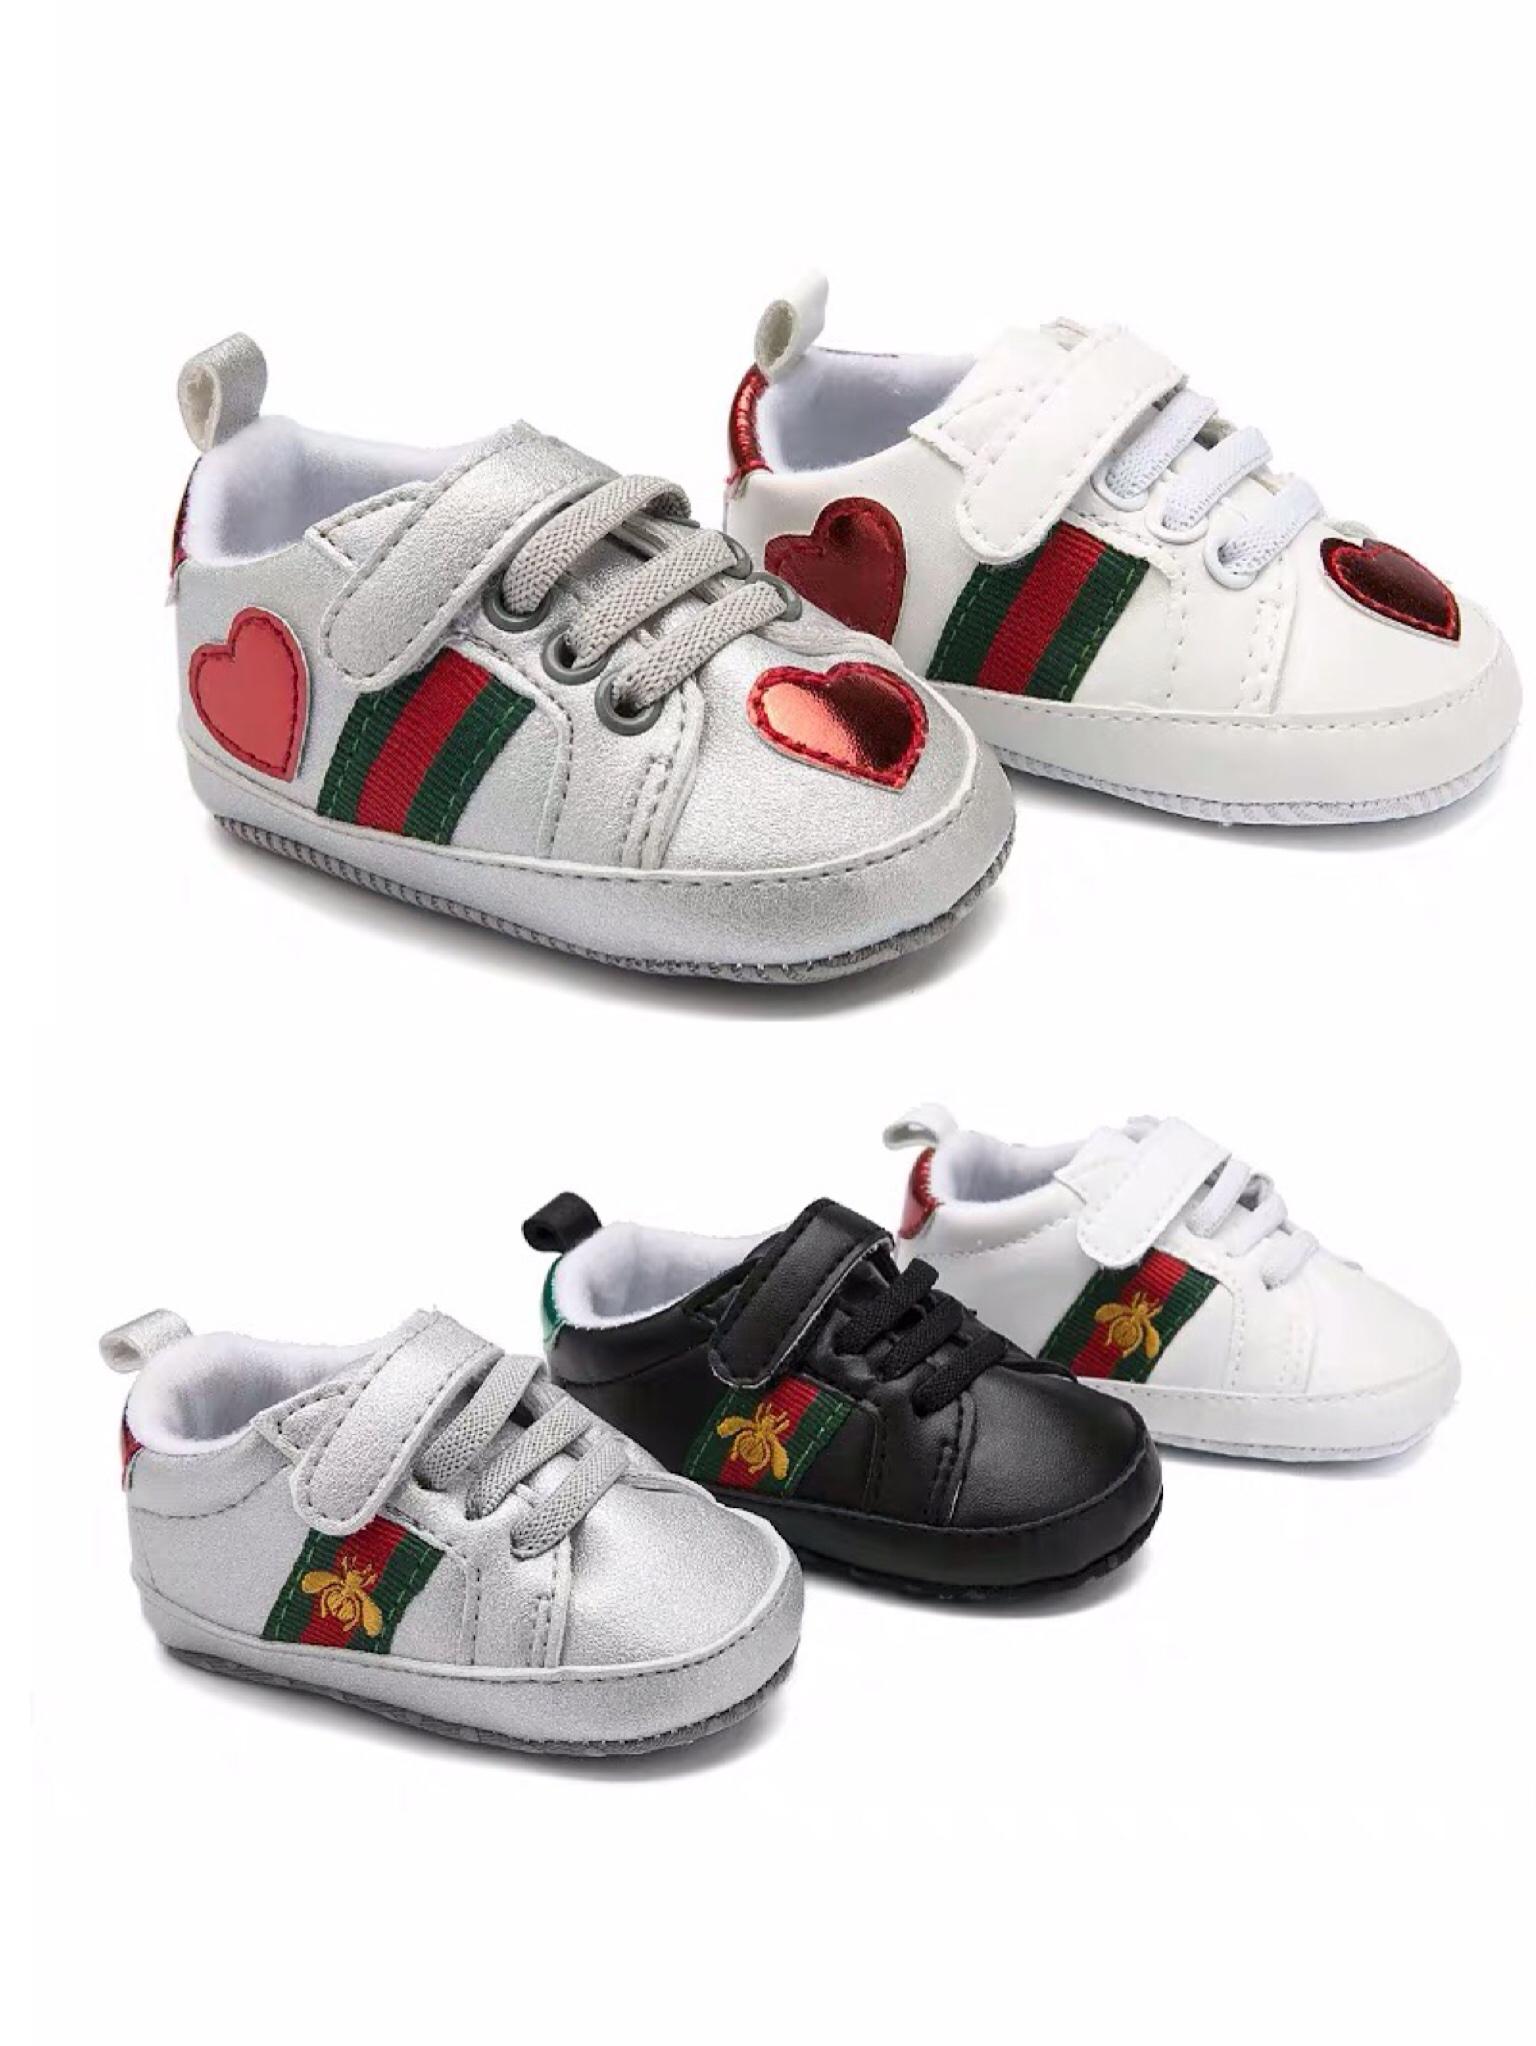 LAST PAIR sz 81/2 genuine Leather girls white shoes toddler kids child footwear 